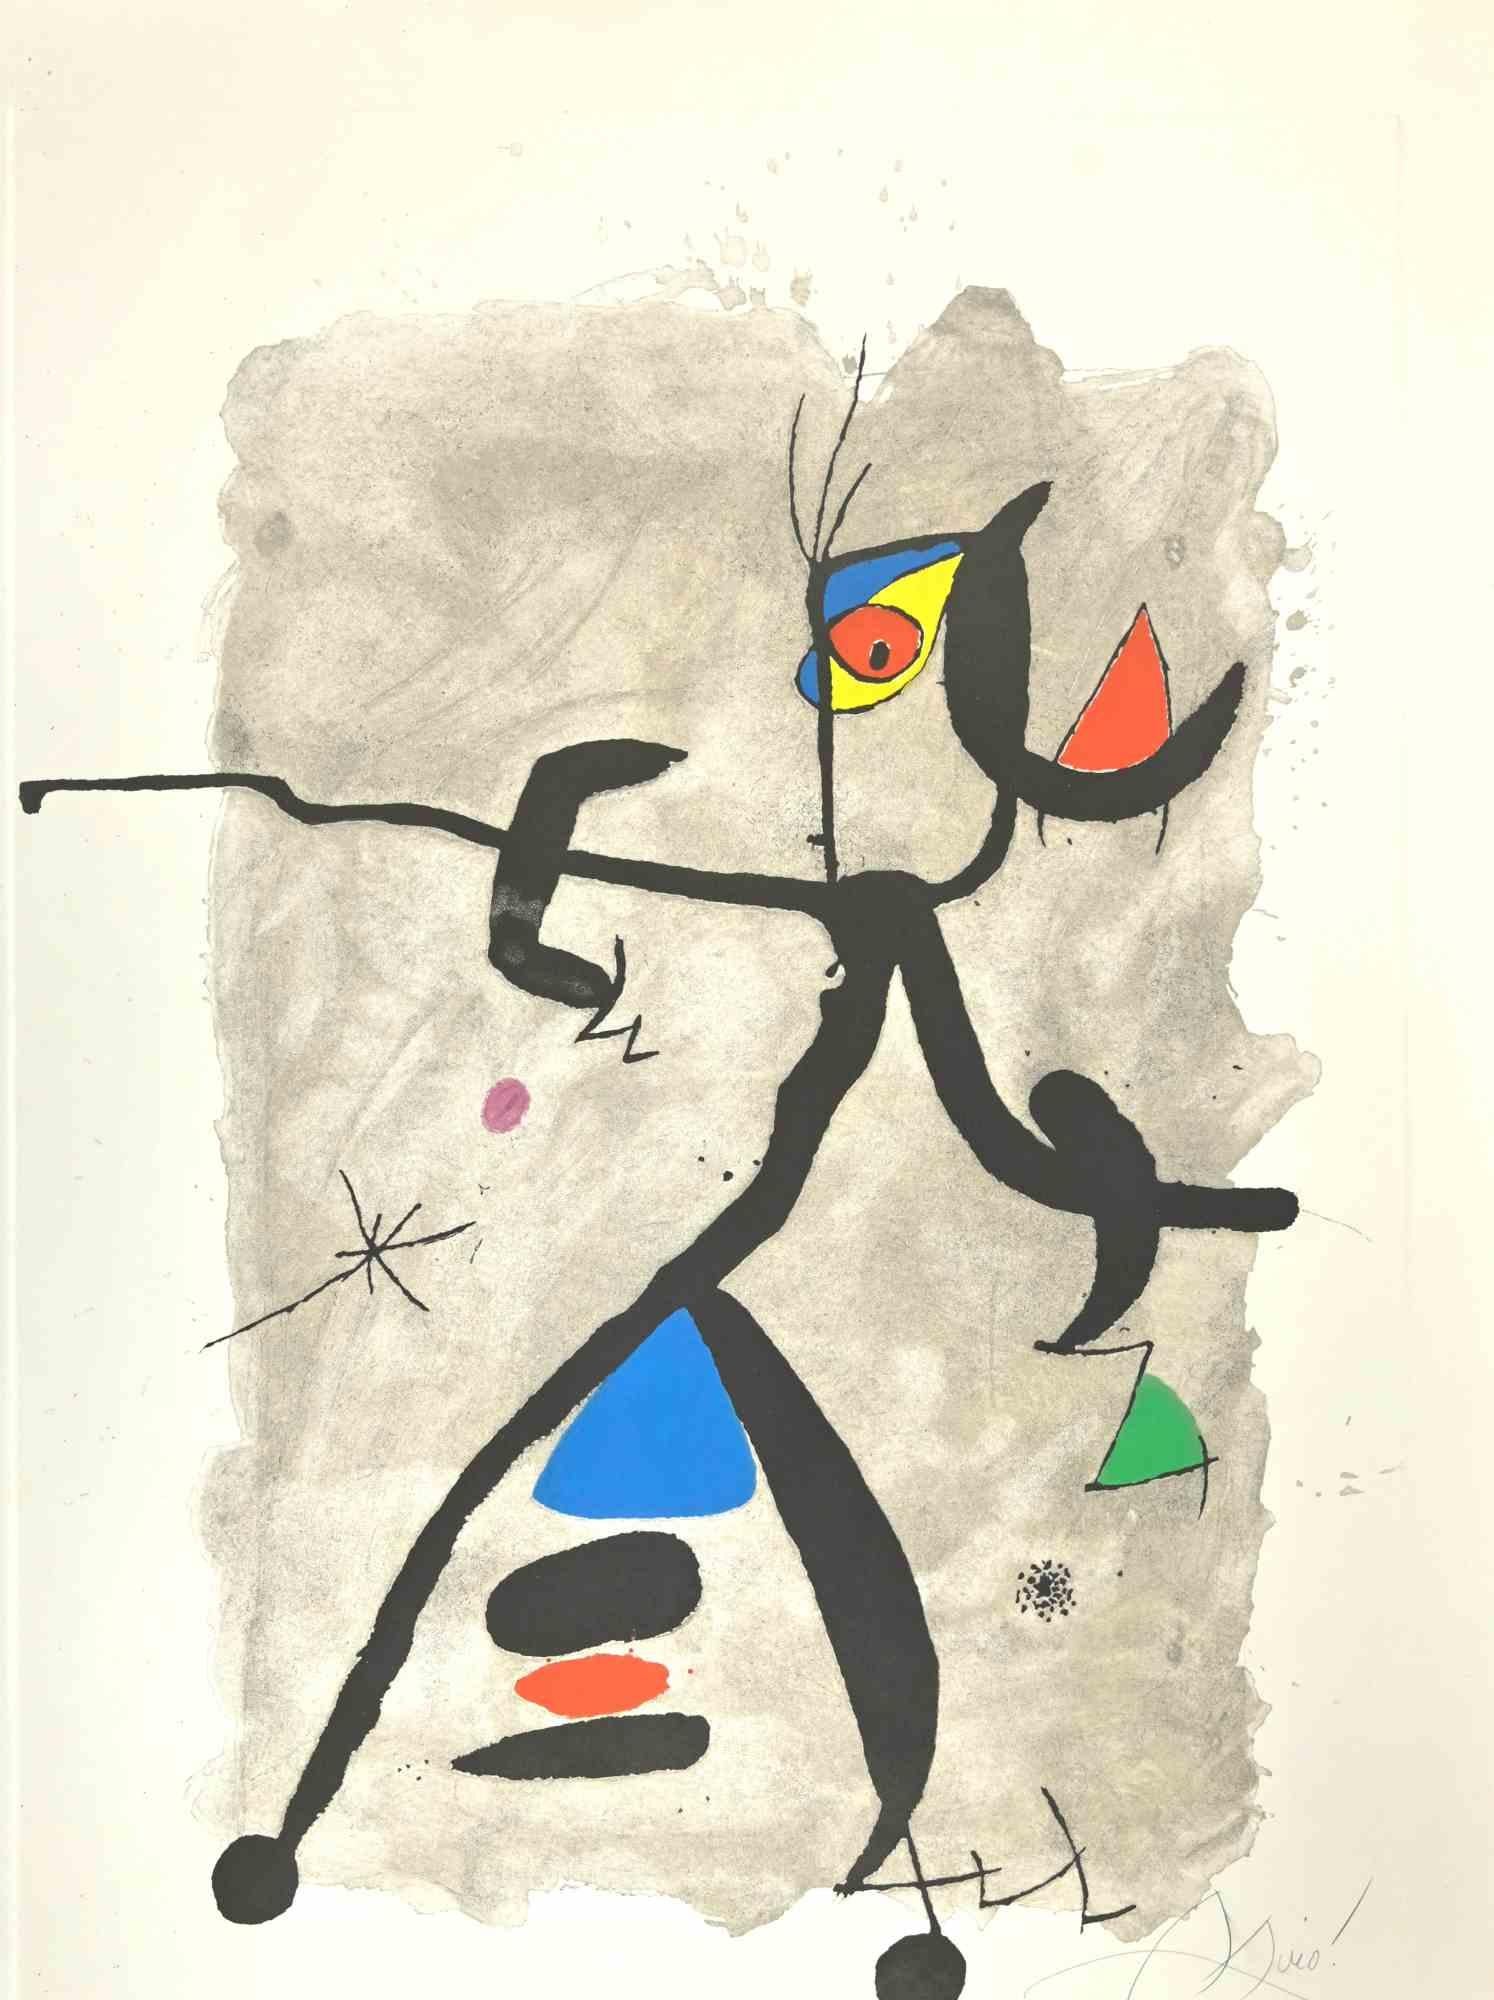 Joan Miró Abstract Print - For Alberti, For Spain - Etching by Joan Mirò - 1975